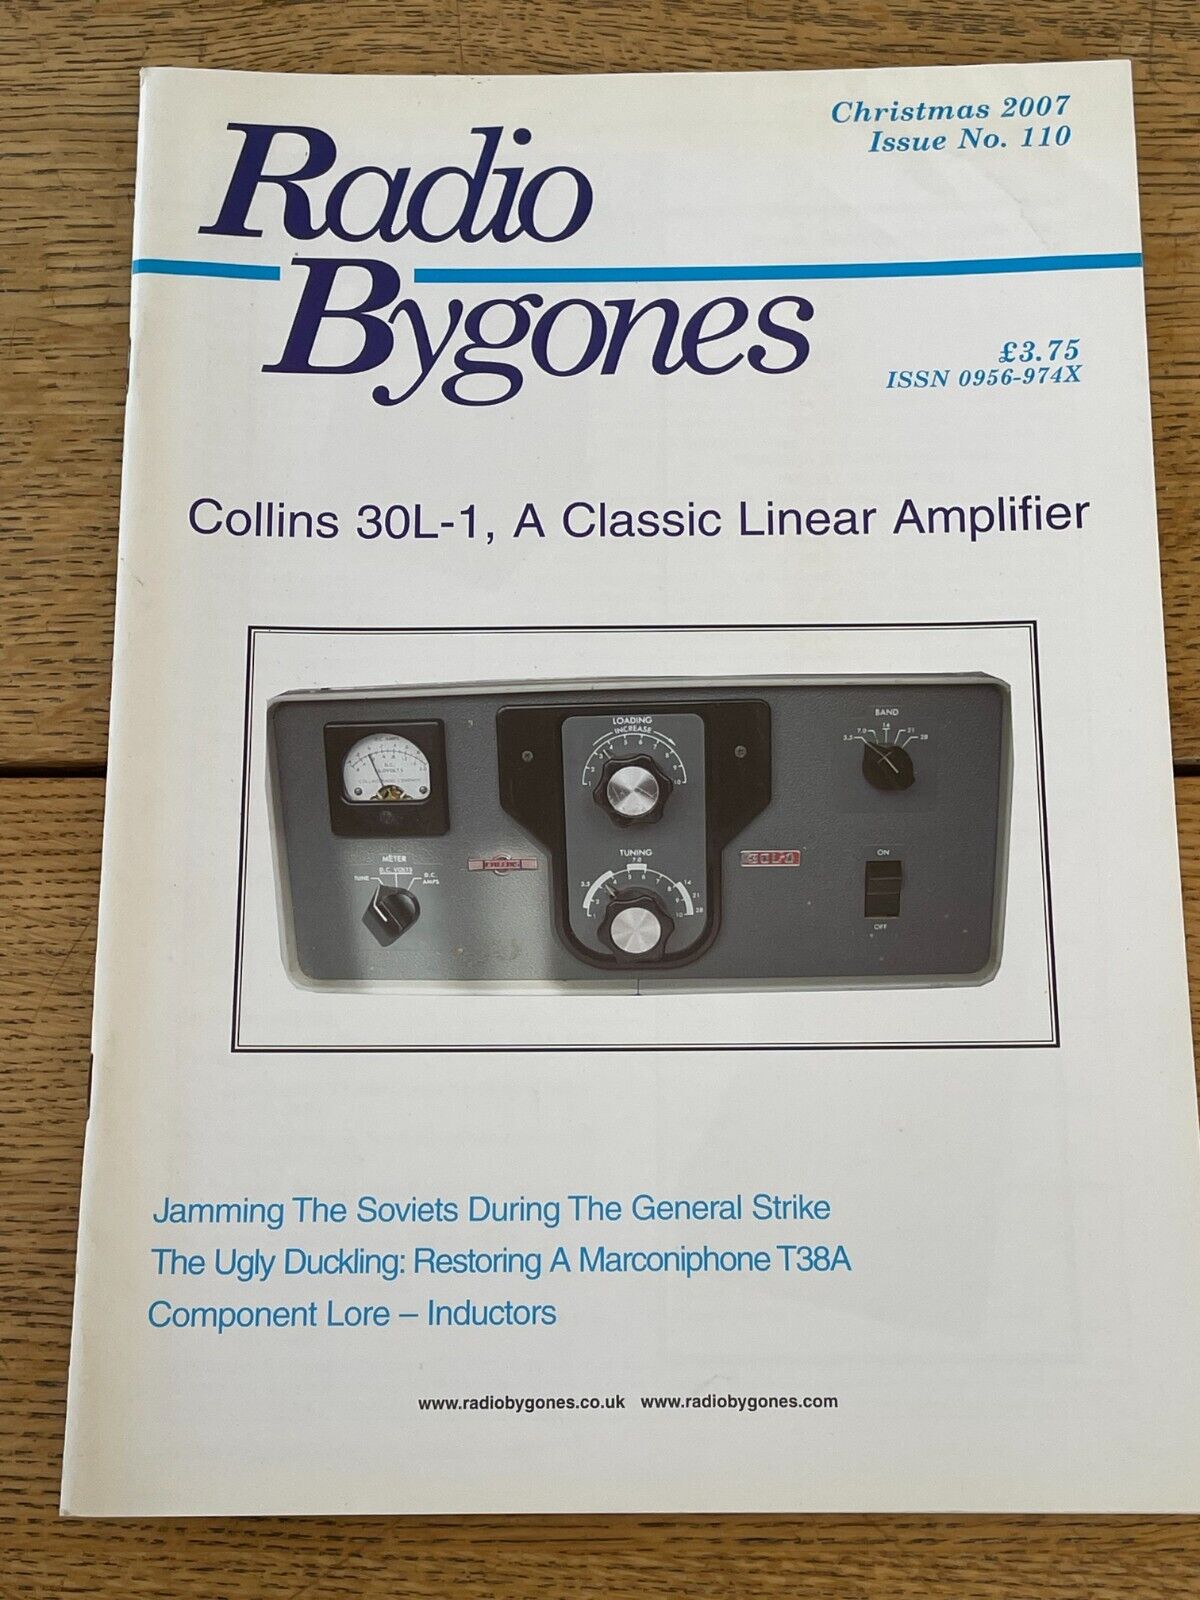 VINTAGE RADIO BYGONES ISSUE 110 COLLINS 30L-1 AMPLIFIER MARCONIPHONE T38A